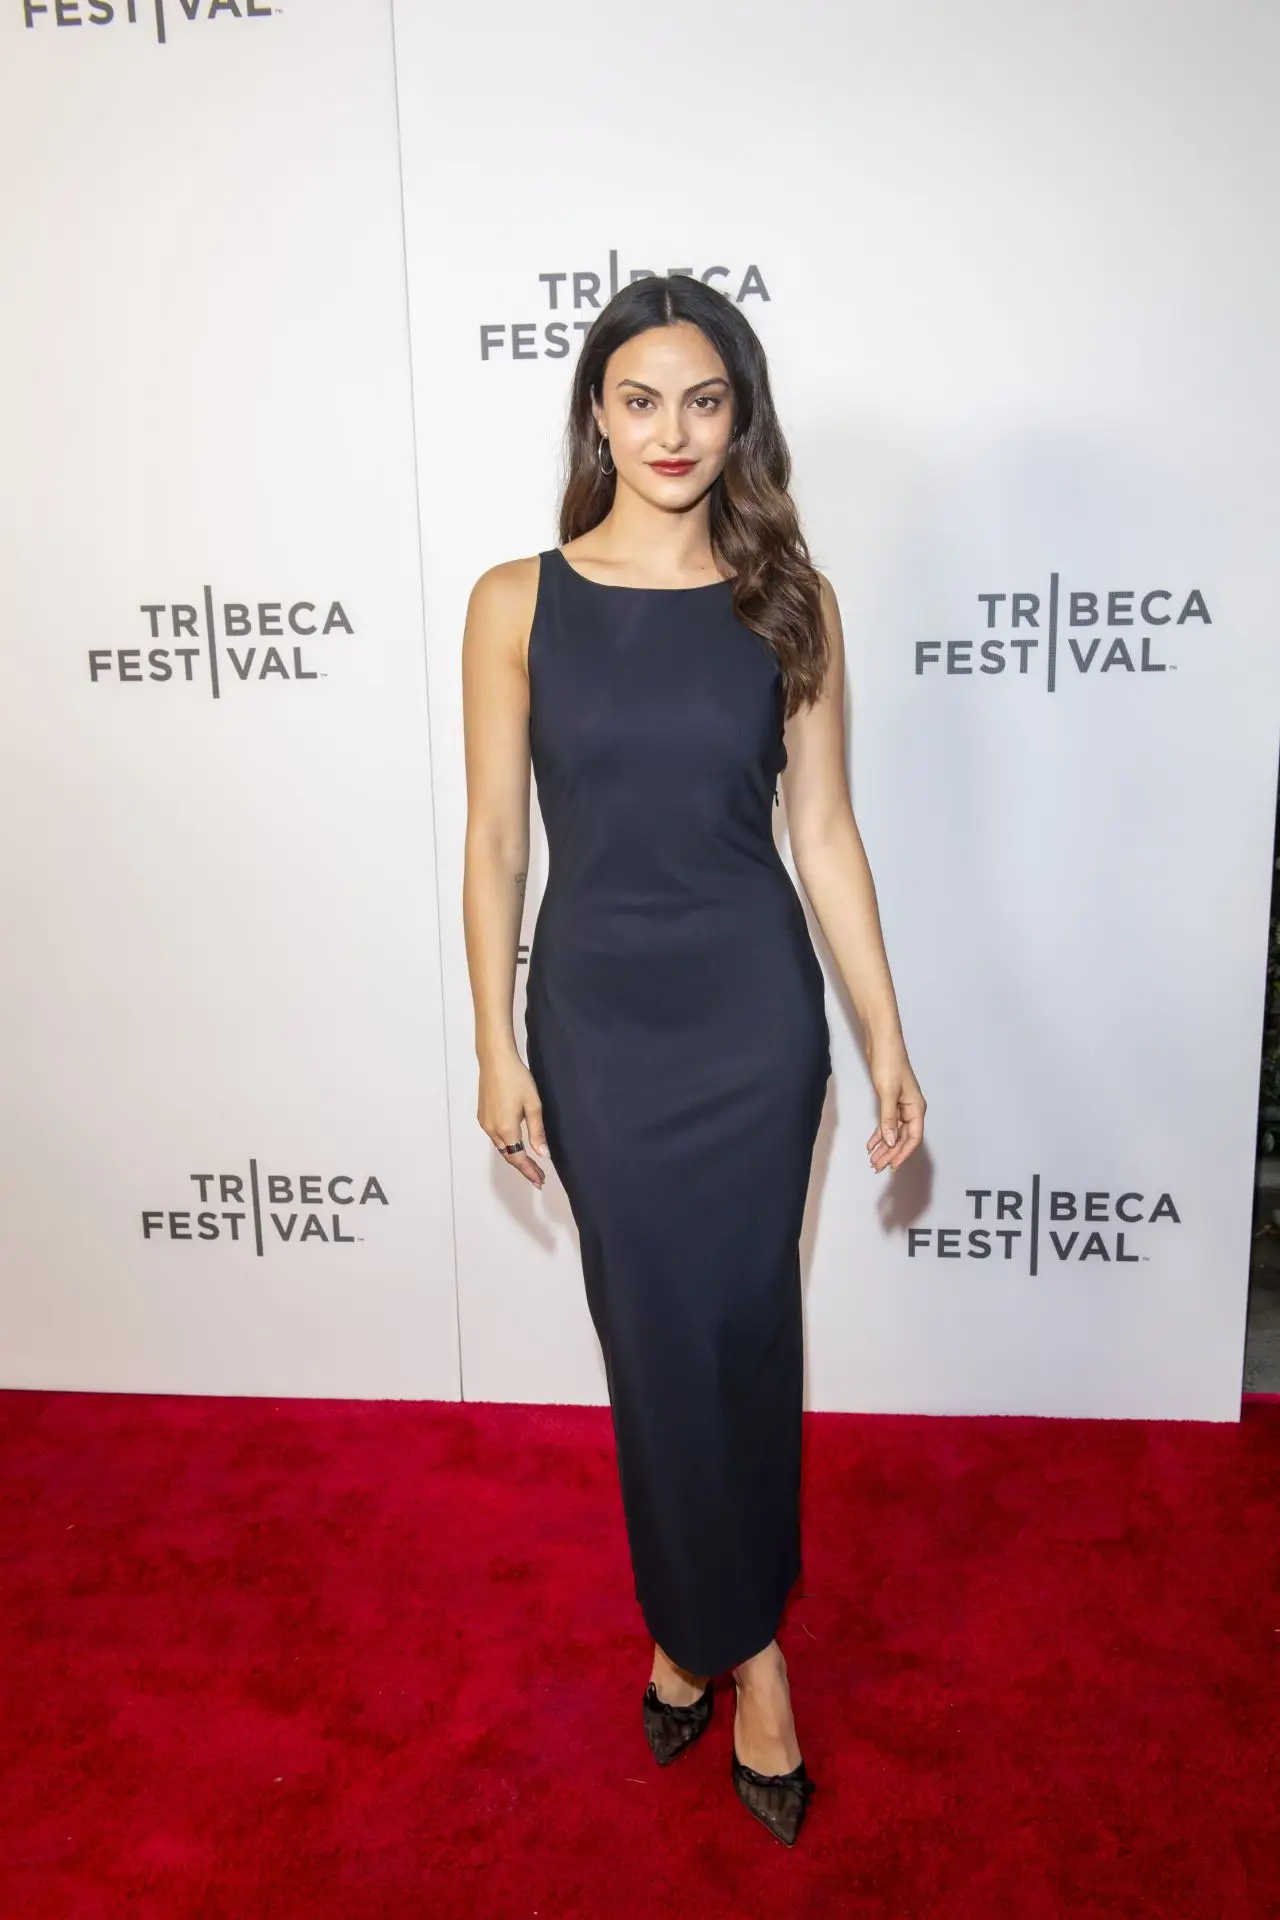 CAMILA MENDES AT THE SUMMER PREMIERE AT THE TRIBECA FESTIVAL IN NEW YORK10